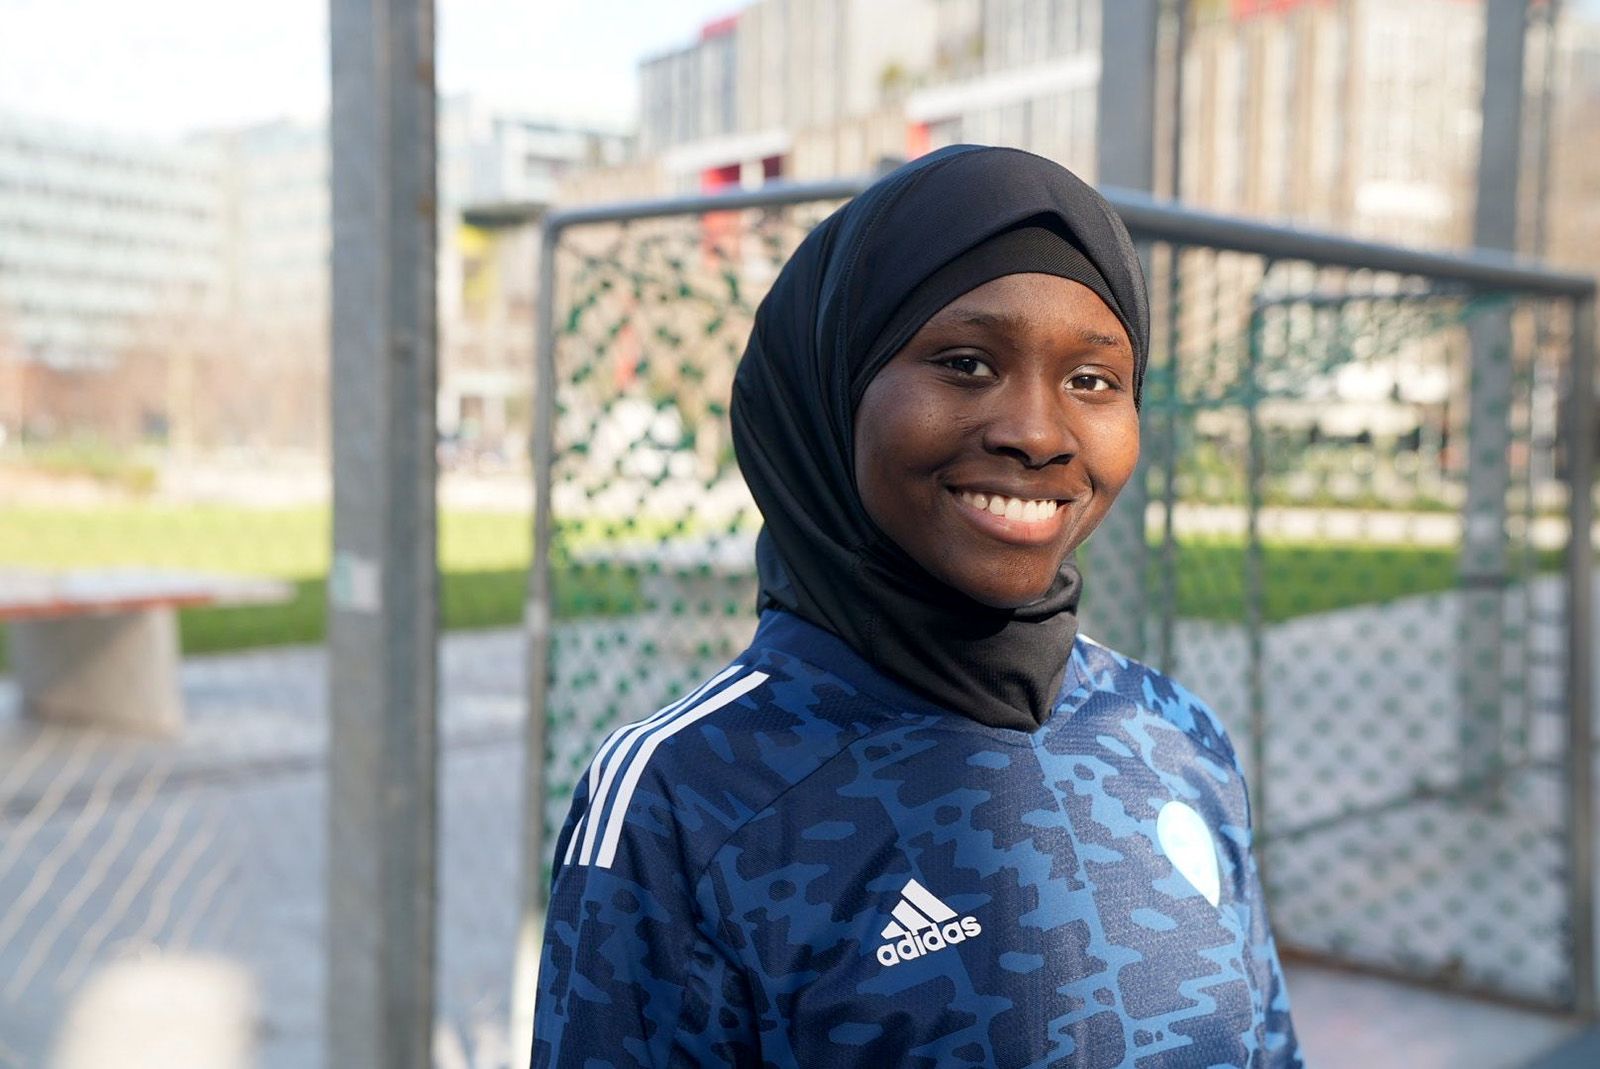 French proposed a hijab ban in competitive sports. The impact on women could be devastating. |